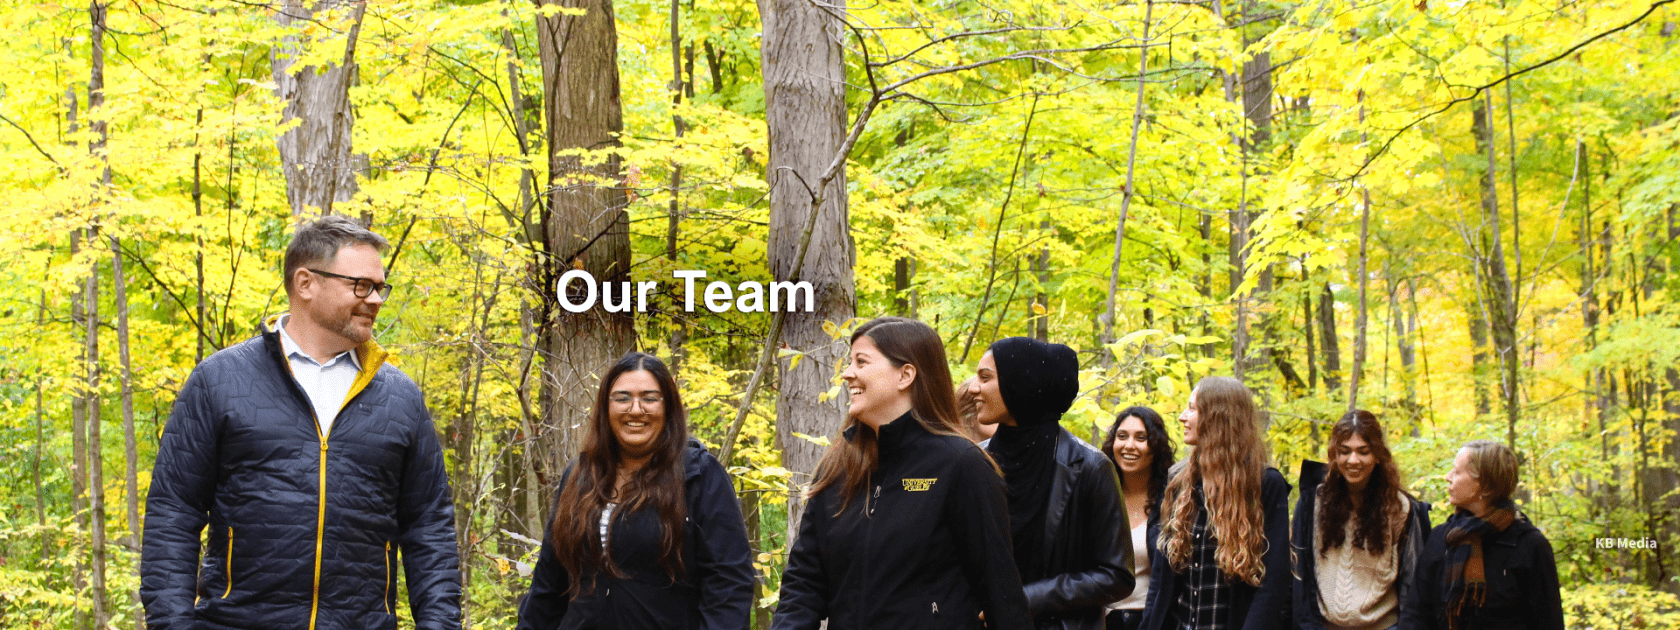 RCVM@OVC current team members walking through a wooded area in the Arboretum, University of Guelph